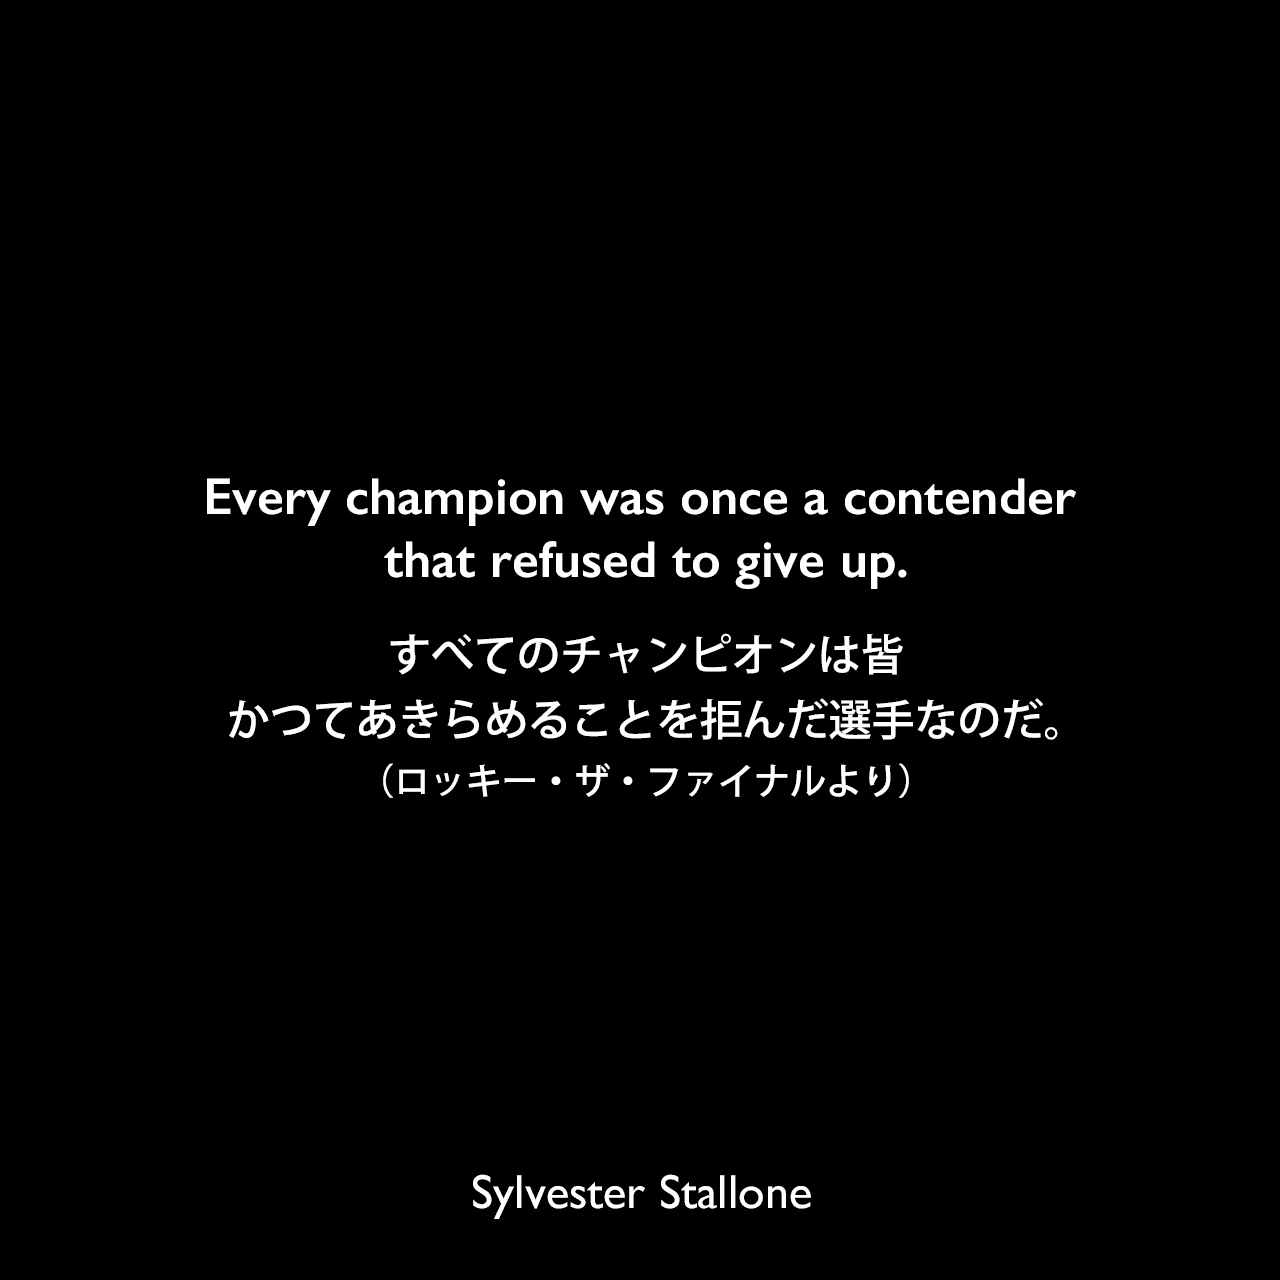 Every champion was once a contender that refused to give up.すべてのチャンピオンは皆、かつてあきらめることを拒んだ選手なのだ。（ロッキー・ザ・ファイナルより）Sylvester Stallone